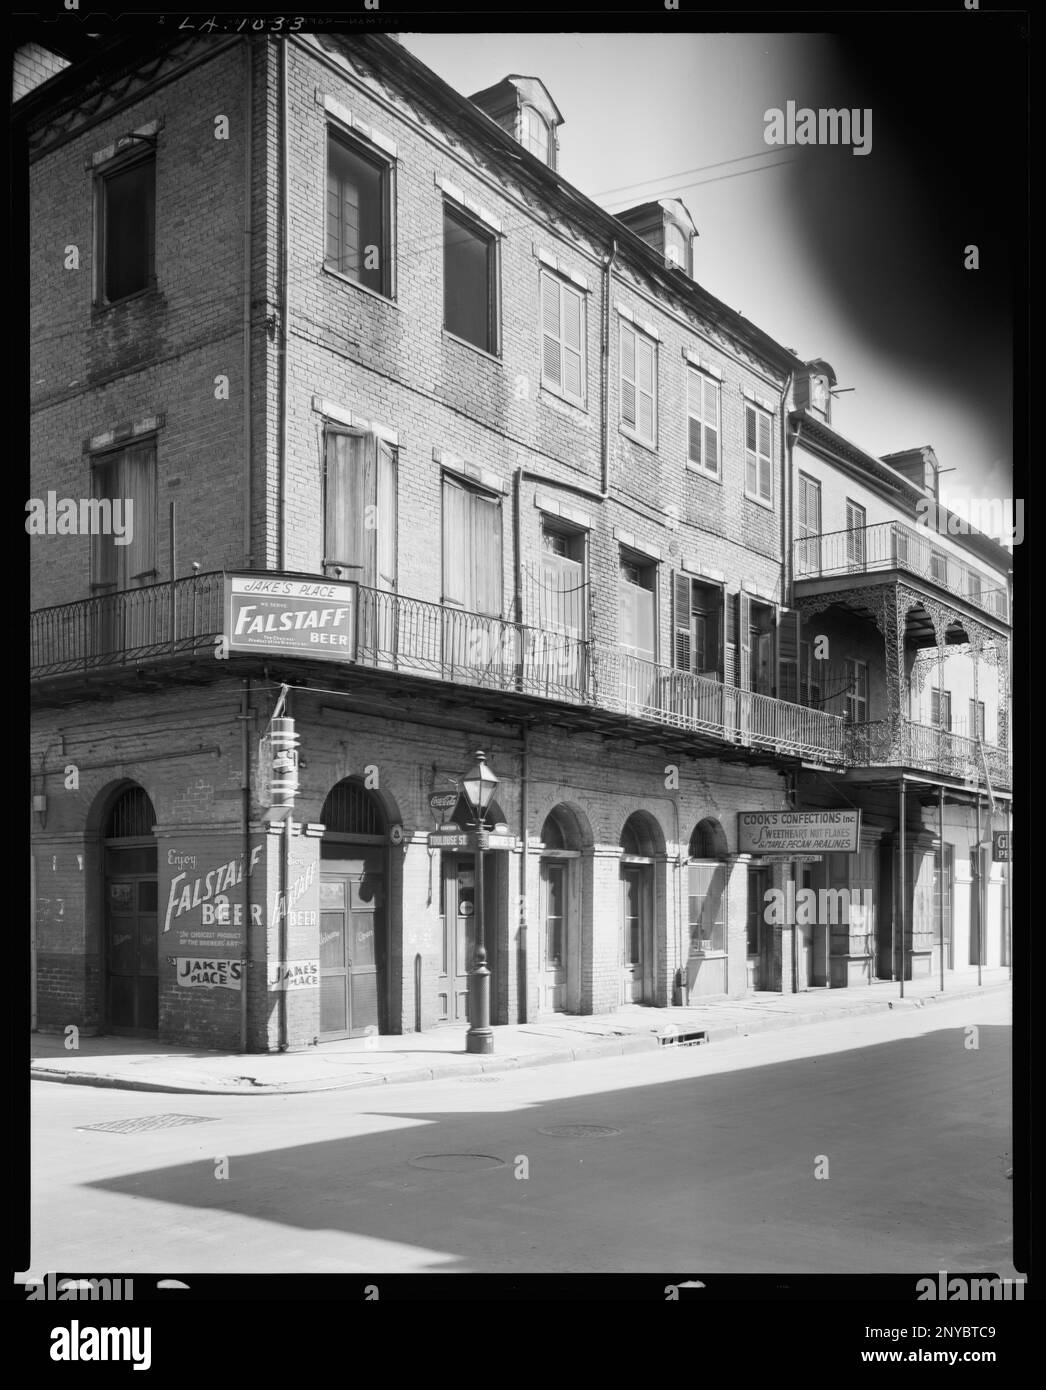 Gally House, 536 Chartres St., New Orleans, Orleans Parish, Louisiana. Carnegie Survey of the Architecture of the South. United States, Louisiana, Orleans Parish, New Orleans,  Advertisements,  Bars,  Balconies,  Brickwork,  Buildings,  Lampposts. Stock Photo